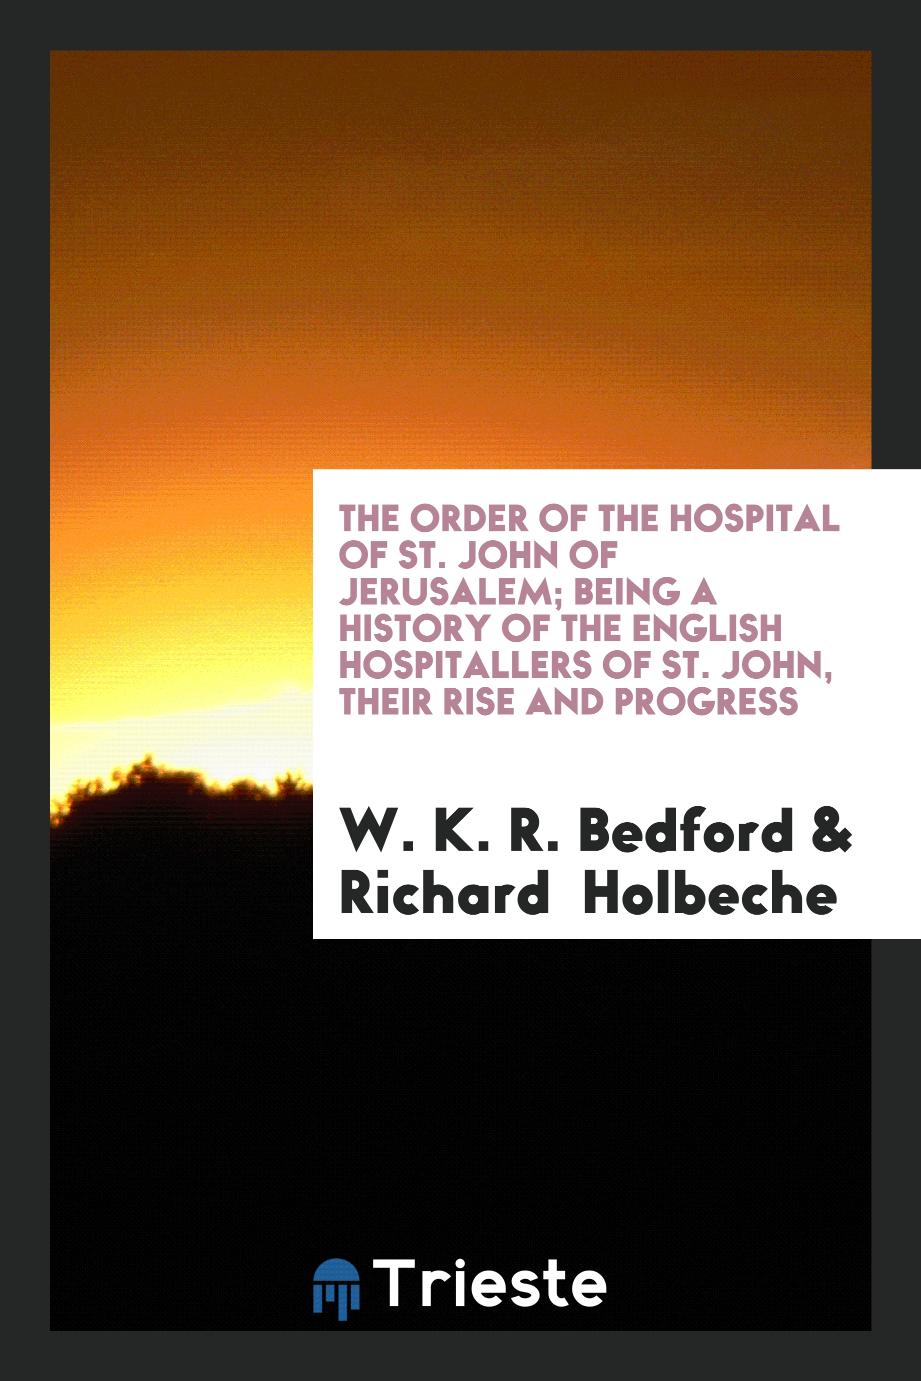 The Order of the Hospital of St. John of Jerusalem; Being a History of the English Hospitallers of St. John, Their Rise and Progress